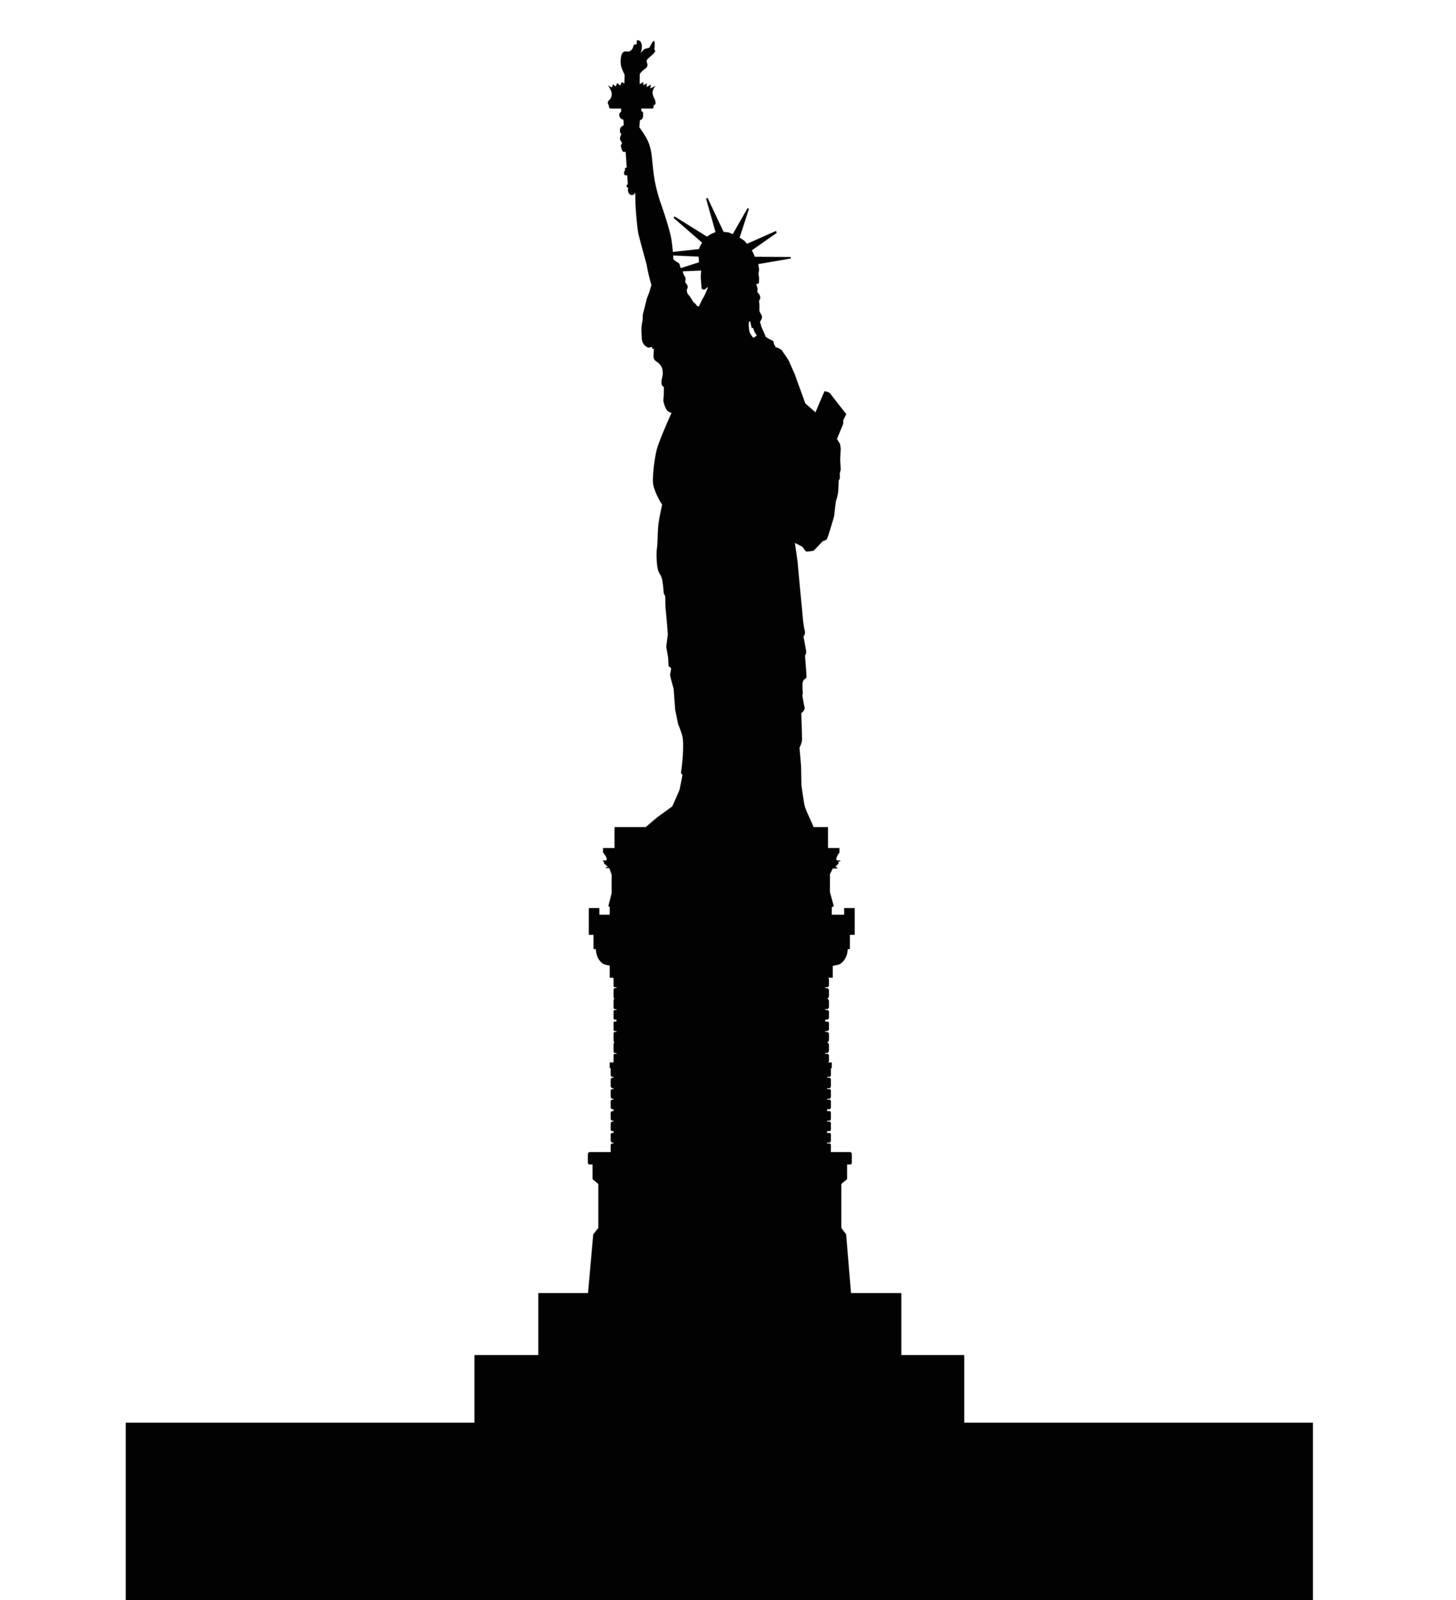 A silhouette of the Statue of Liberty isolated over a white background